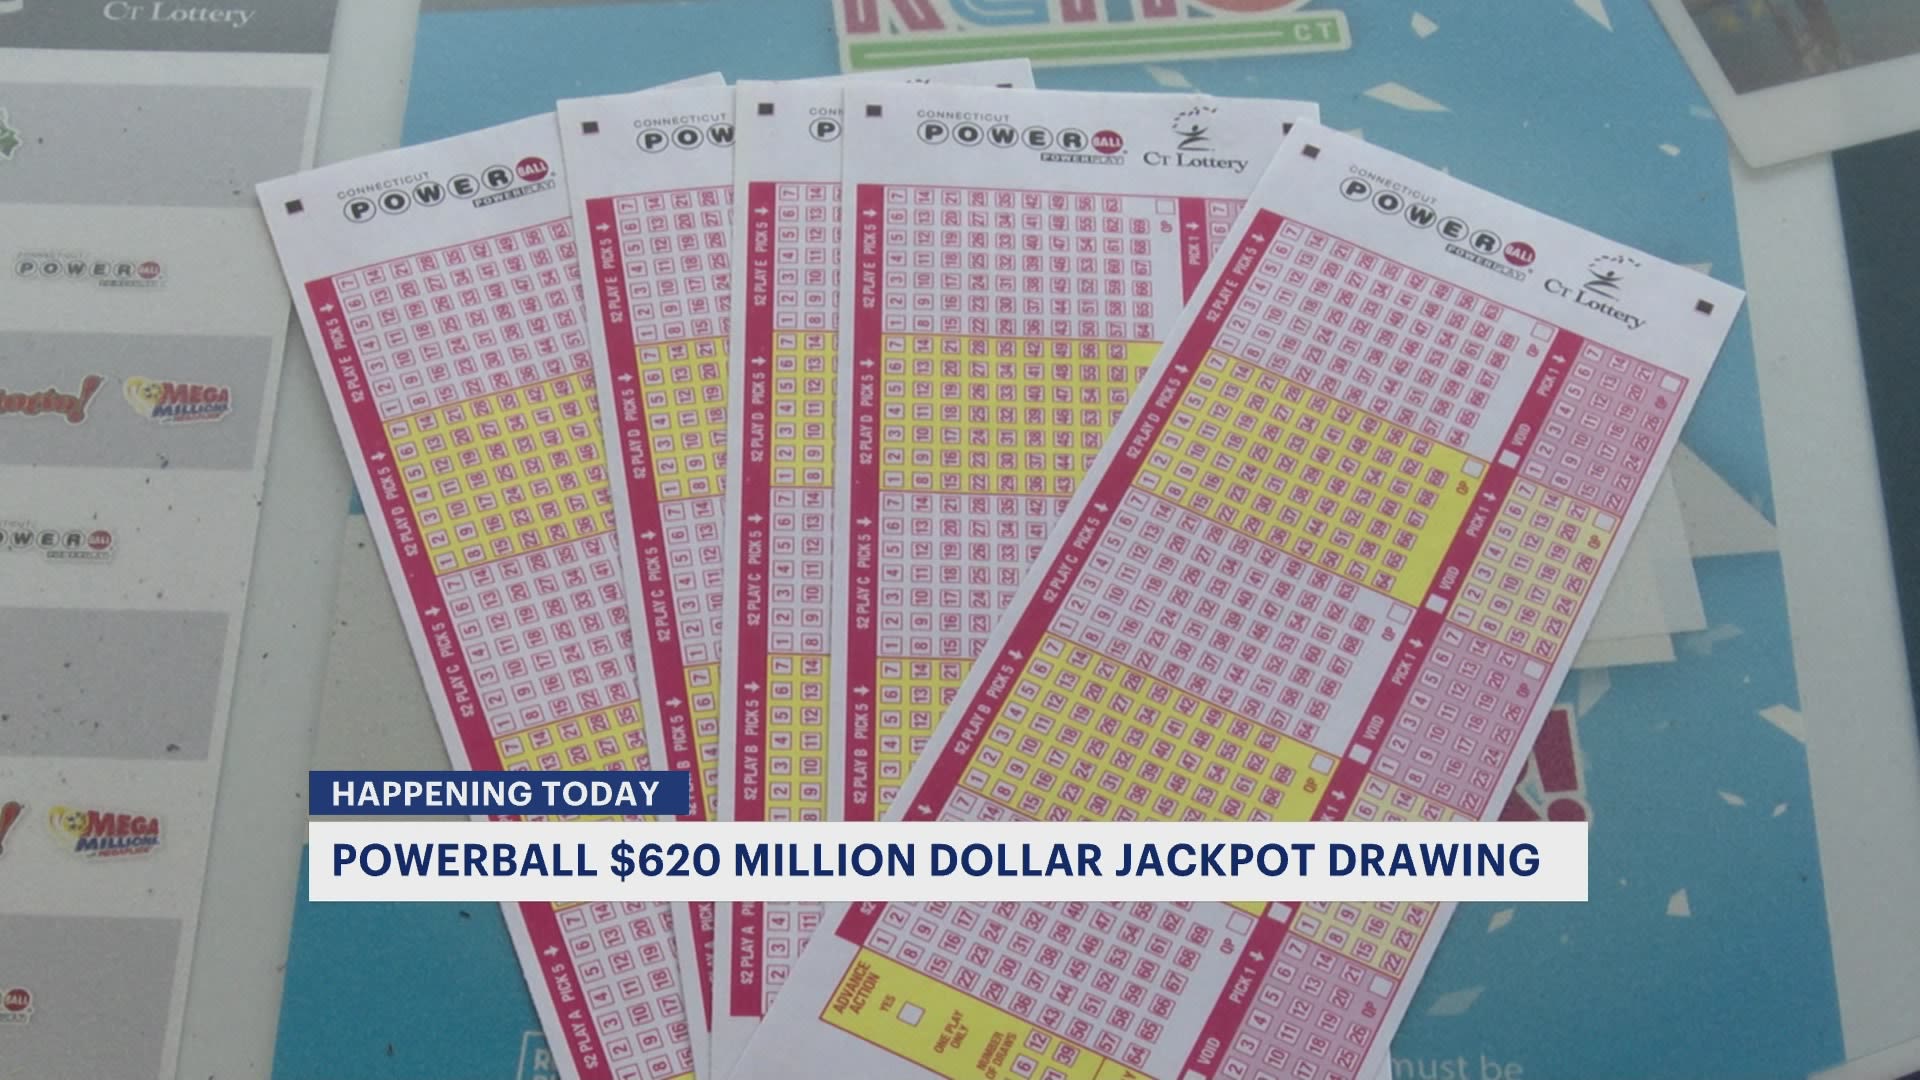 Time for a Christmas miracle Tonight's Powerball drawing is up to